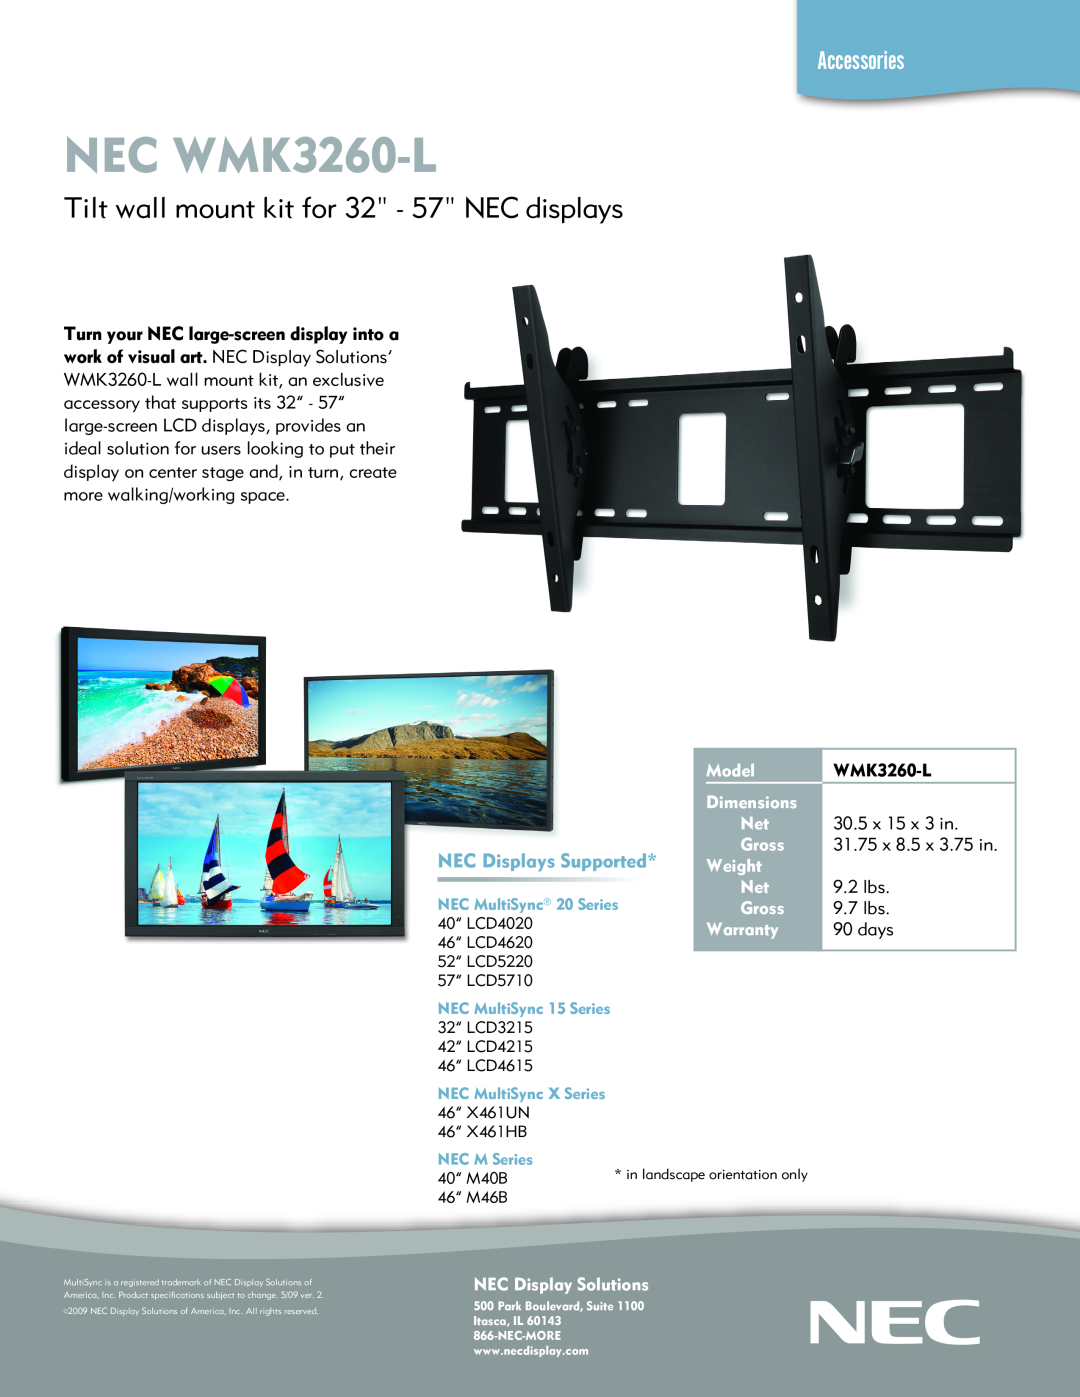 NEC specifications NEC WMK3260-L, Tilt wall mount kit for 32 - 57 NEC displays, Accessories, NEC Displays Supported 